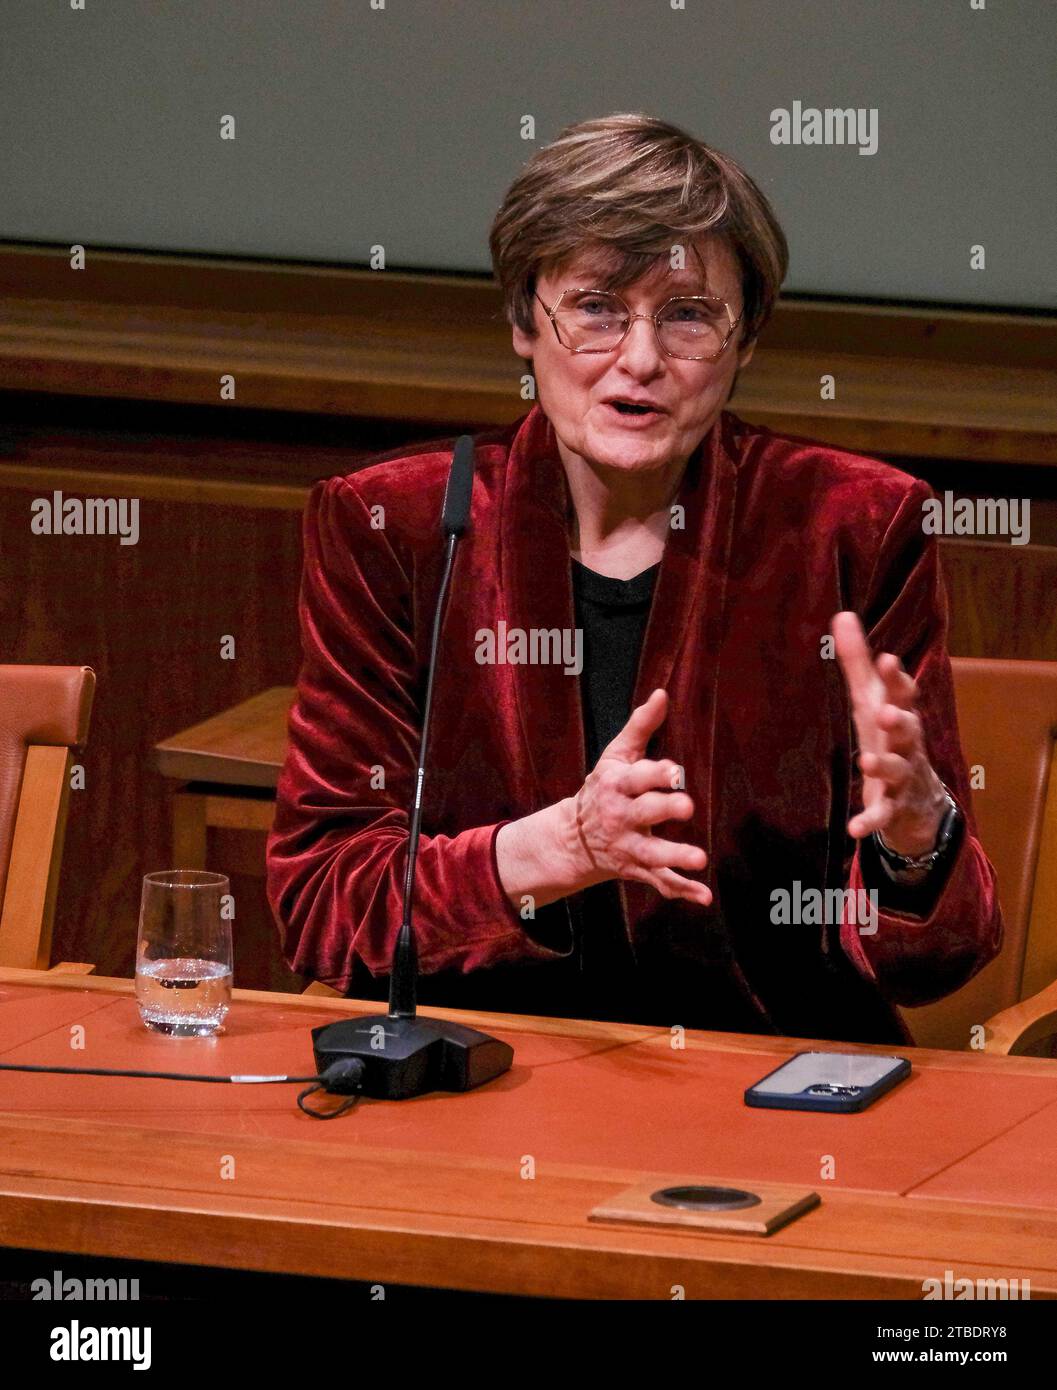 Karolinska Institute in Sweden. December 6, 2023: Winners of the 2023 Nobel Prize for Physiology and Medicine, KATALIN KARIKO, at a press conference at the Nobel Forum at the Karolinska Institute in Sweden. Also present was the co-winner Drew Weissman. Both are from the University of Pennsylvania. The two were awarded the Nobel Prize for their discoveries about how RNA interacts with the immune system. Their work made possible development of the Covid-19 vaccine. Credit: ZUMA Press, Inc./Alamy Live News Stock Photo